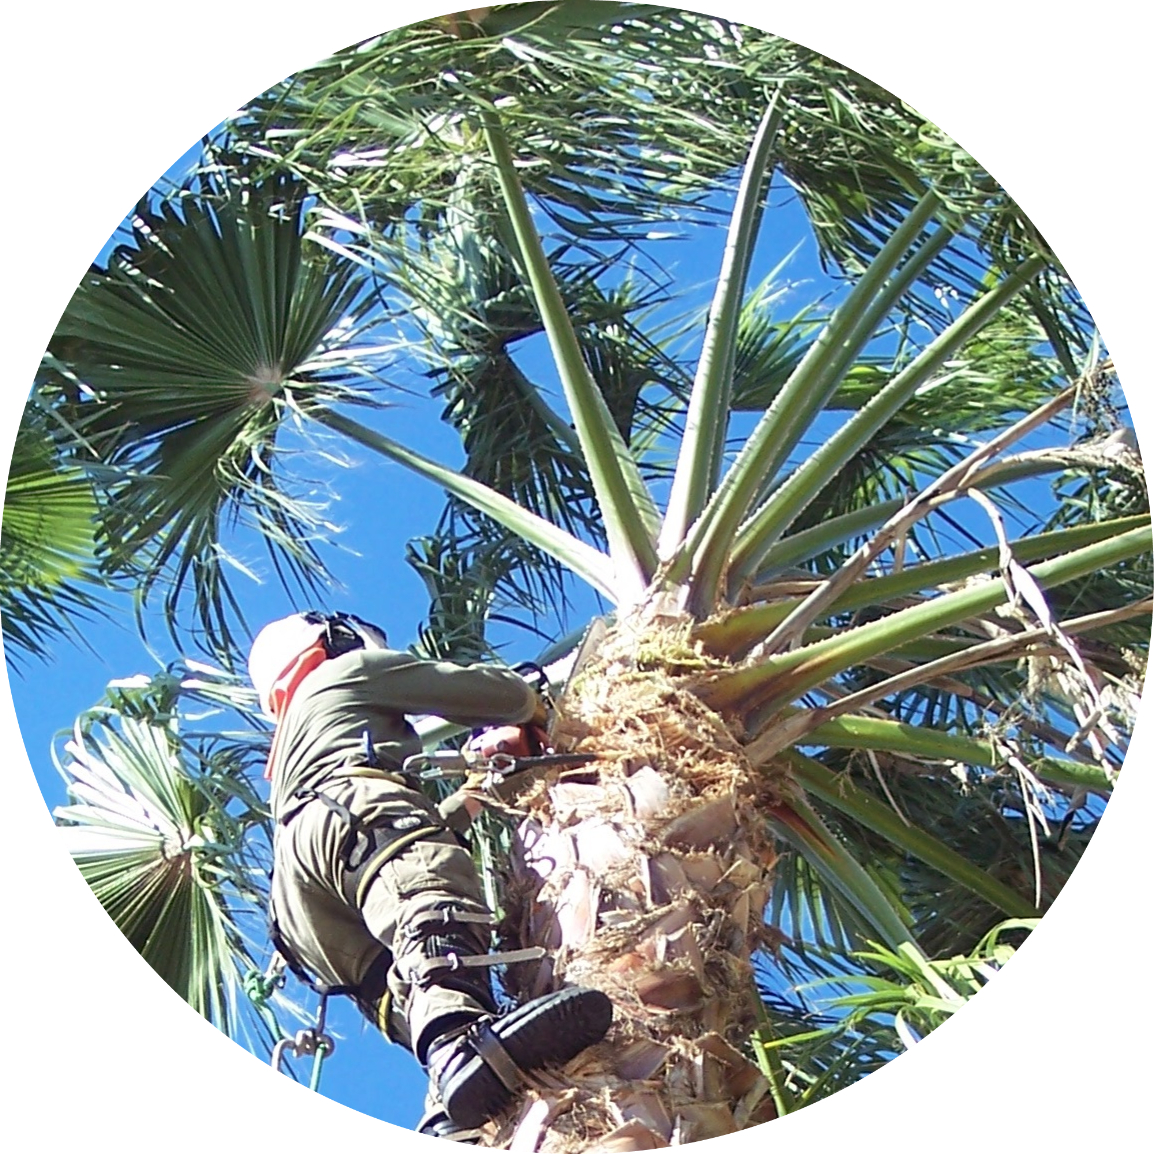 Owner of business Andy Batha trimming a palm tree